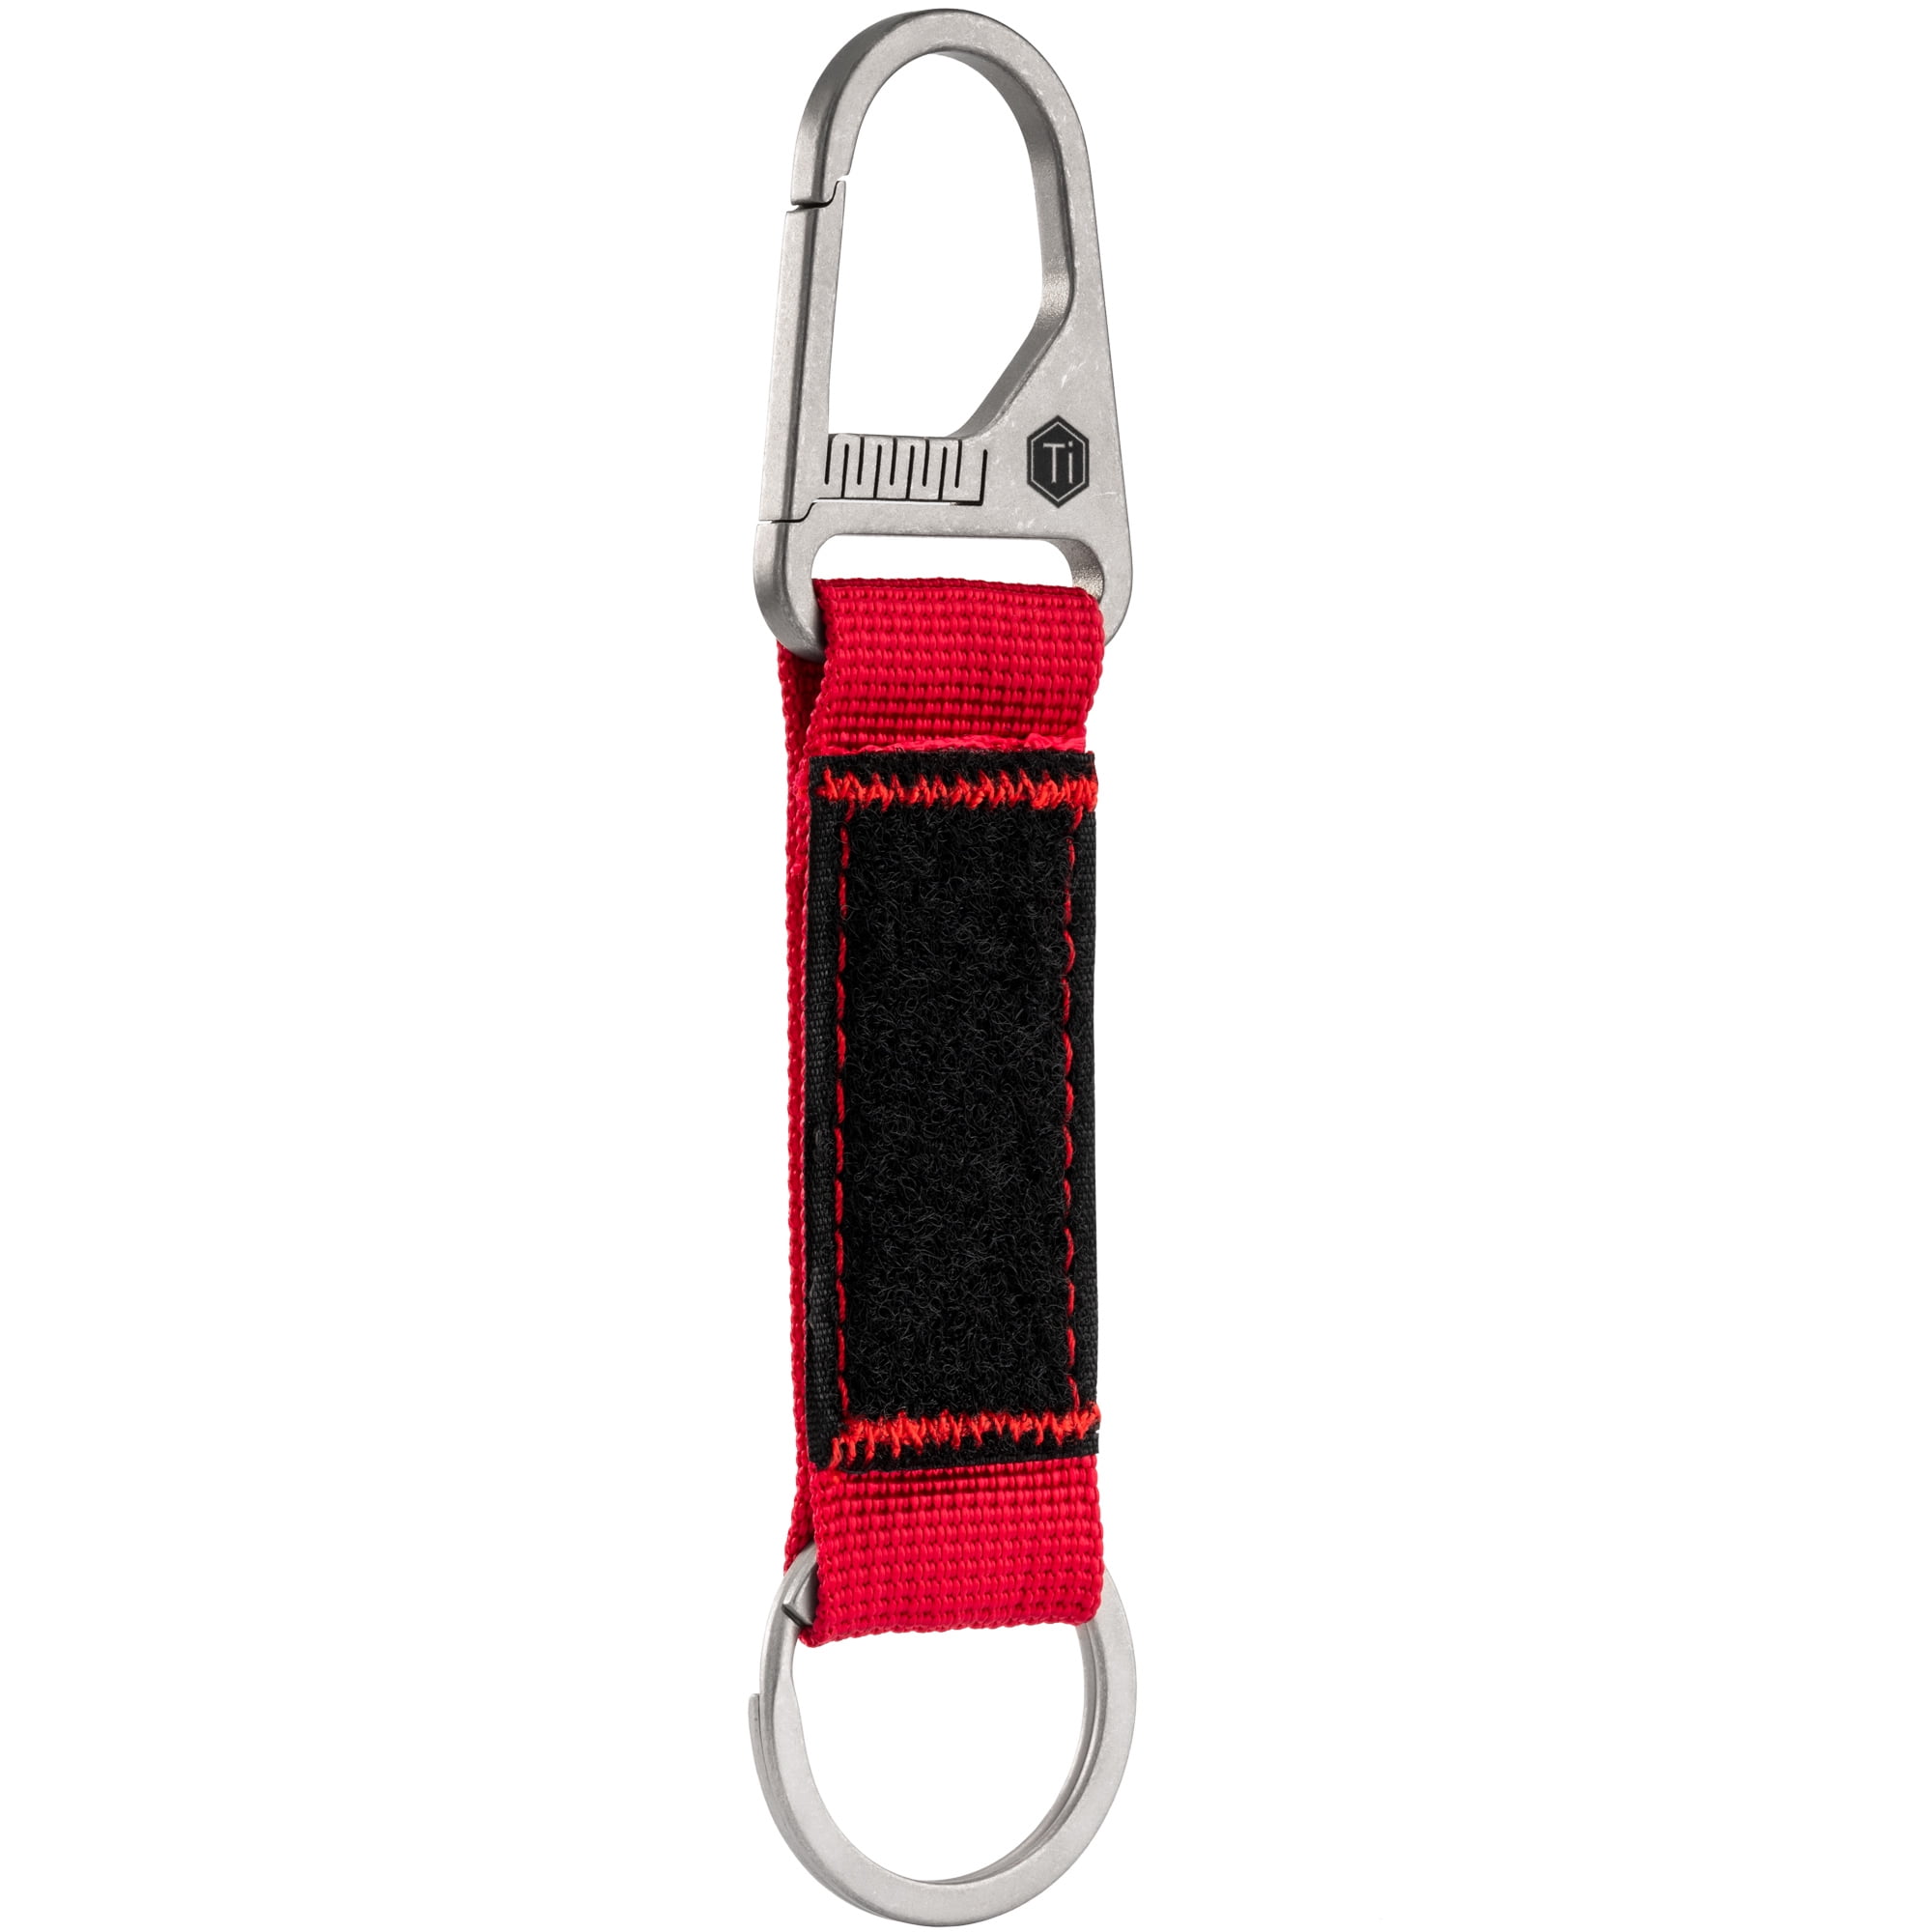 KeyUnity Titanium Carabiner Keychain, Carabiner Lanyard Keychain Strap with Hook for Backpack, Survival, Camping, KB01 Red, Adult Unisex, Size: 5.20 x